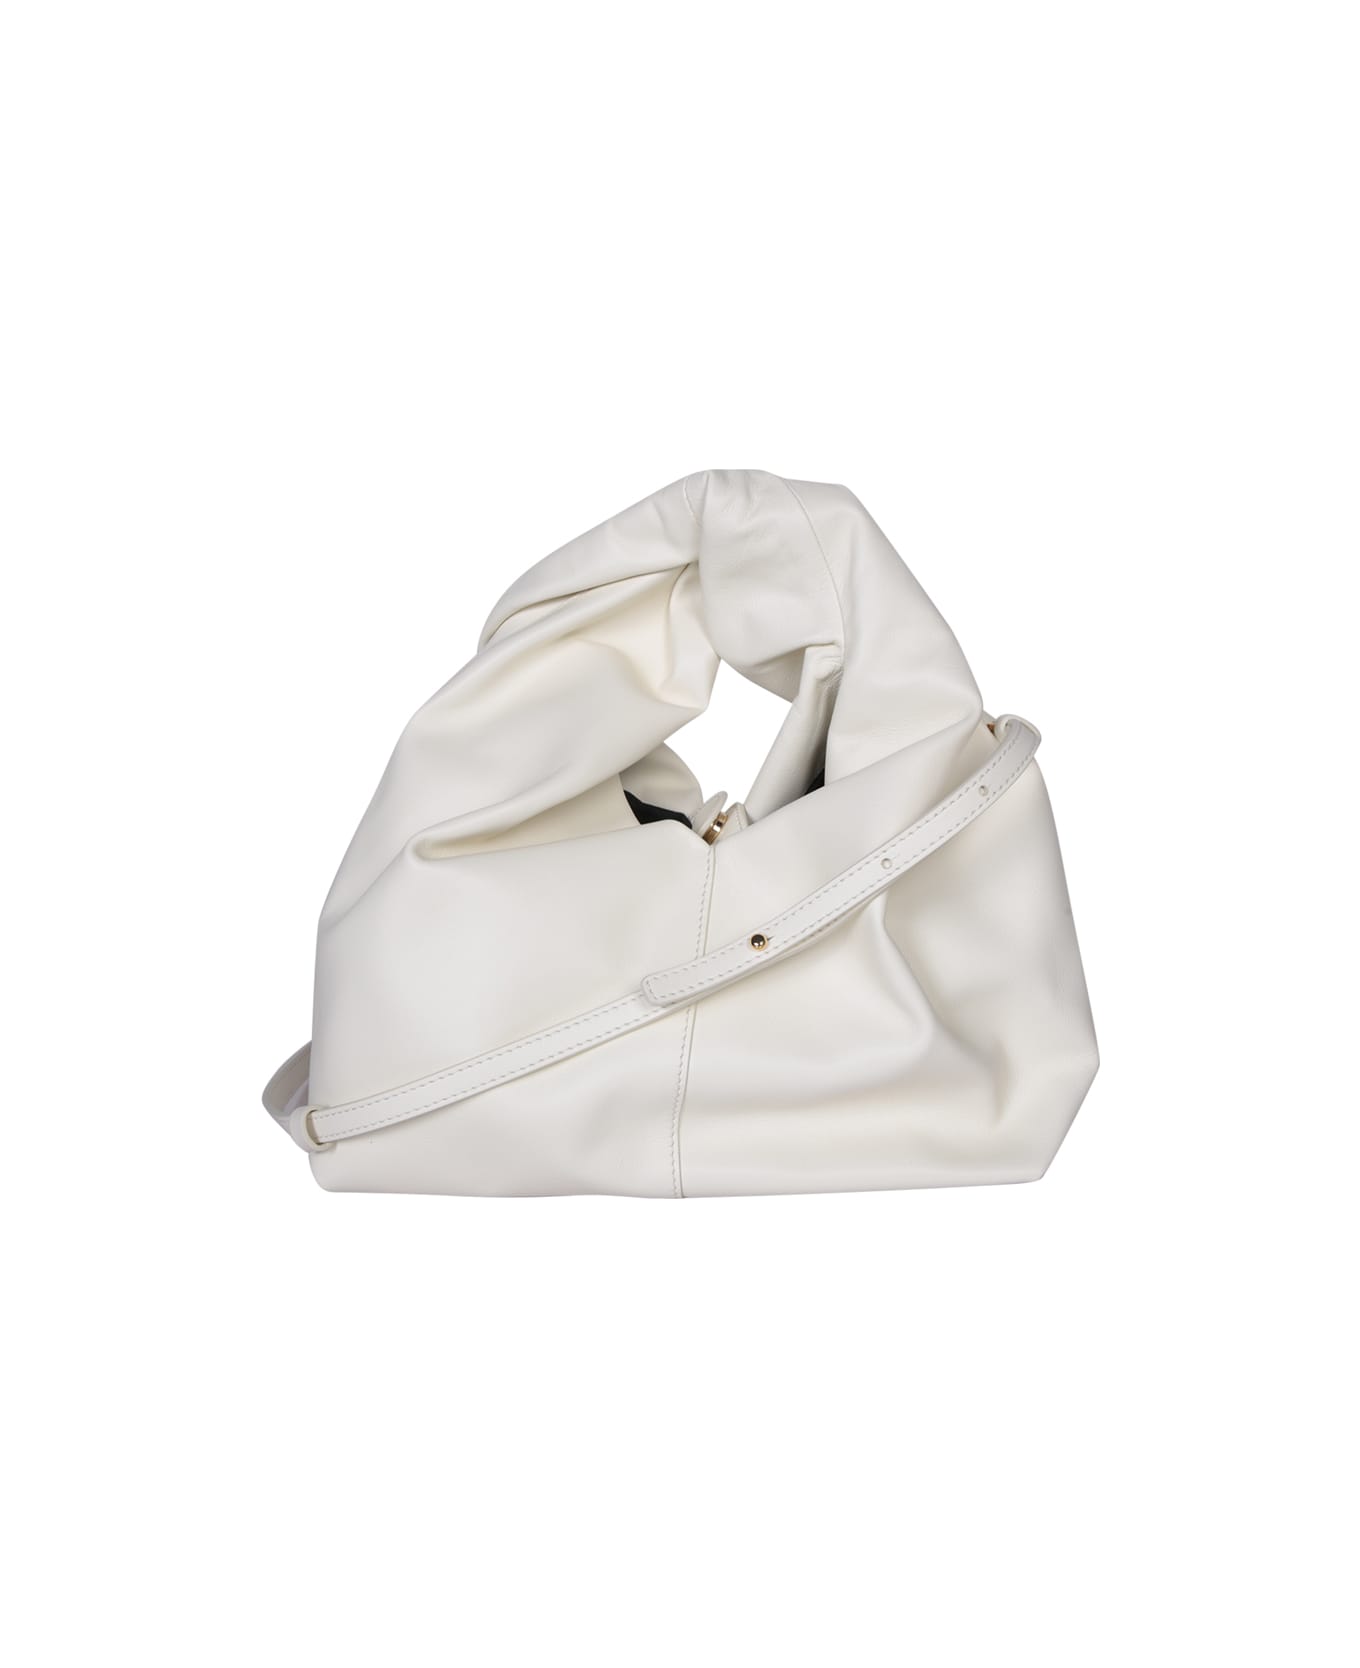 J.W. Anderson White Leather Hobo Twister Bag - OFFWHITE トートバッグ